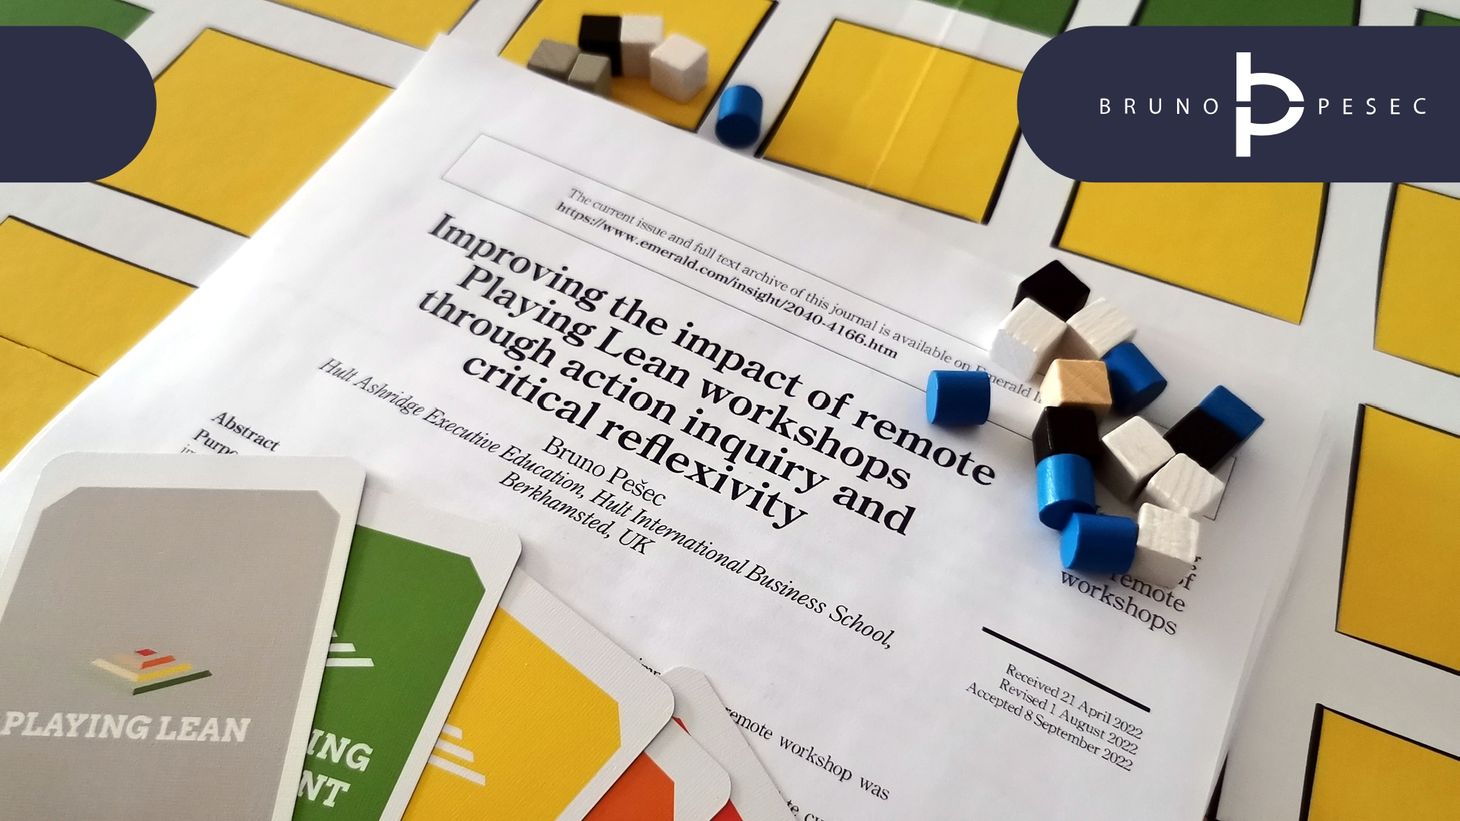 Academic paper printed and placed on top of Playing Lean board game